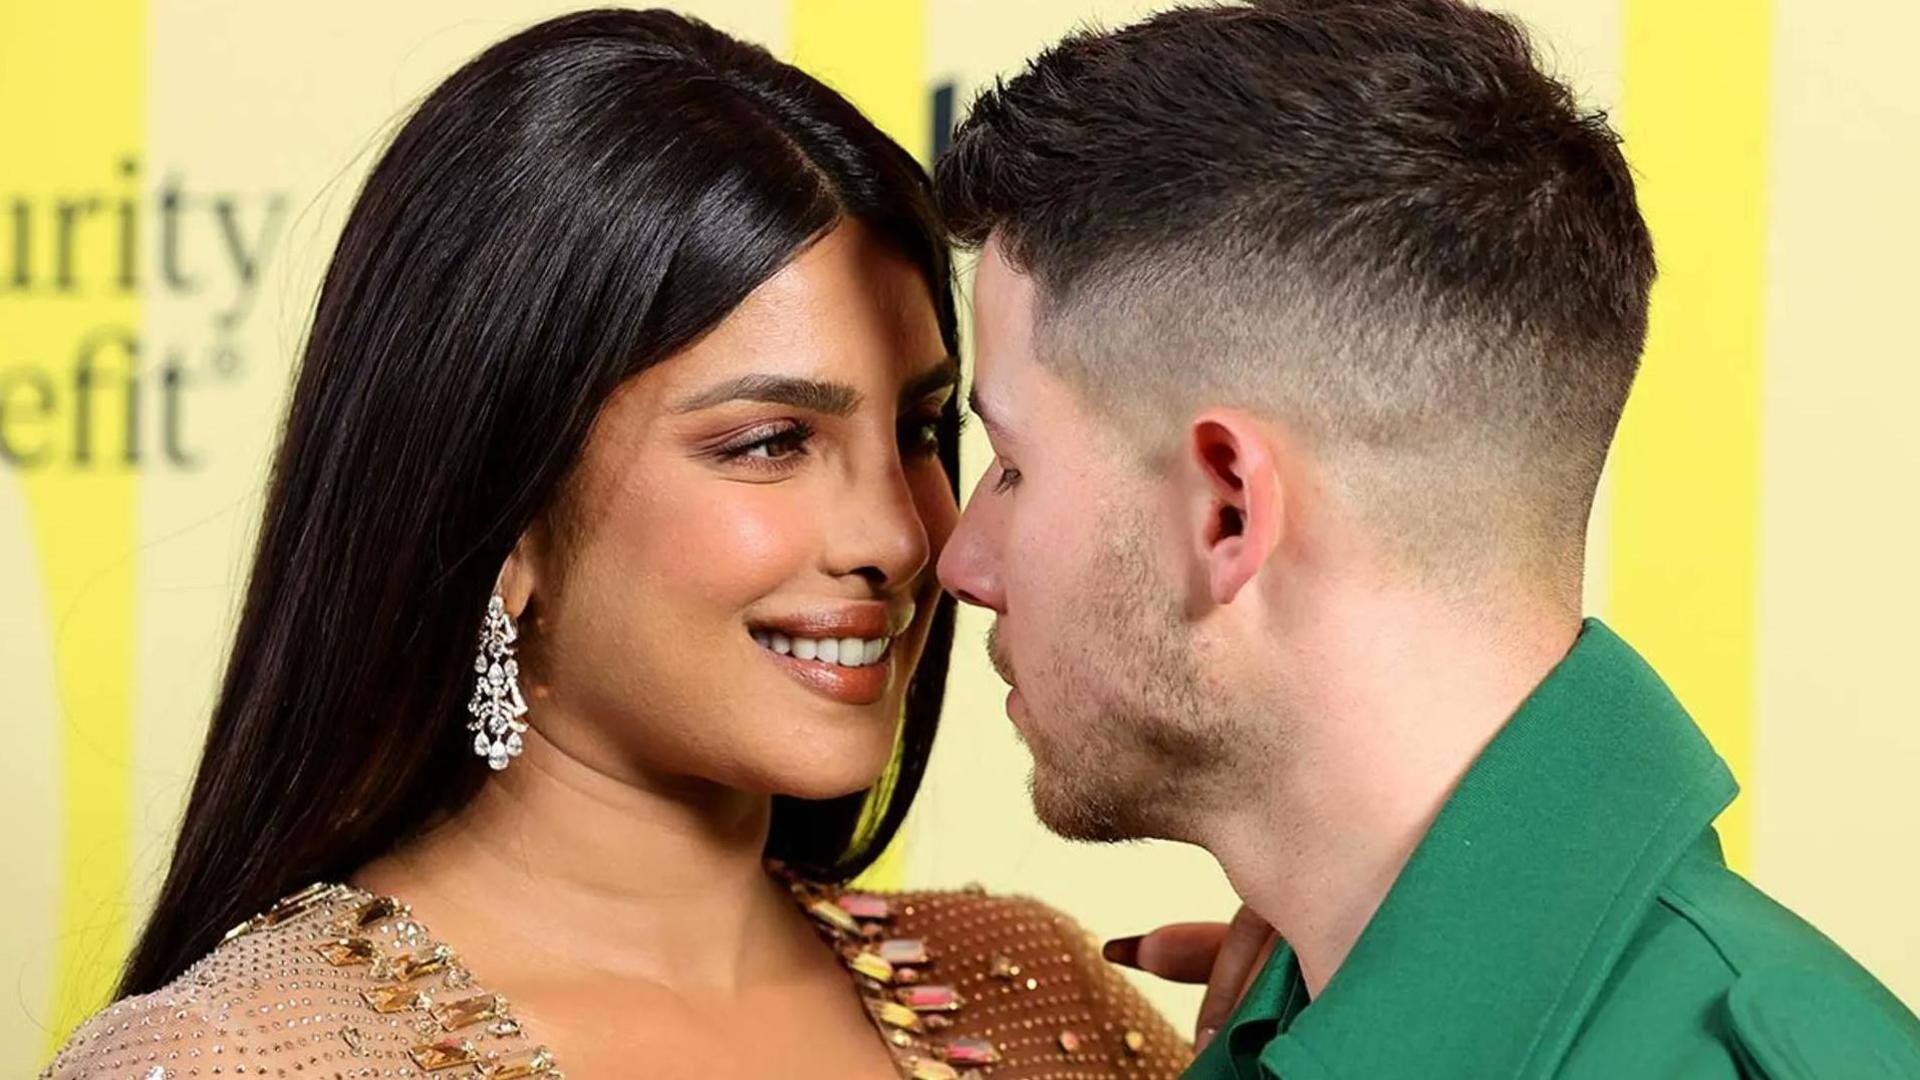 What was Nick's first message to Priyanka